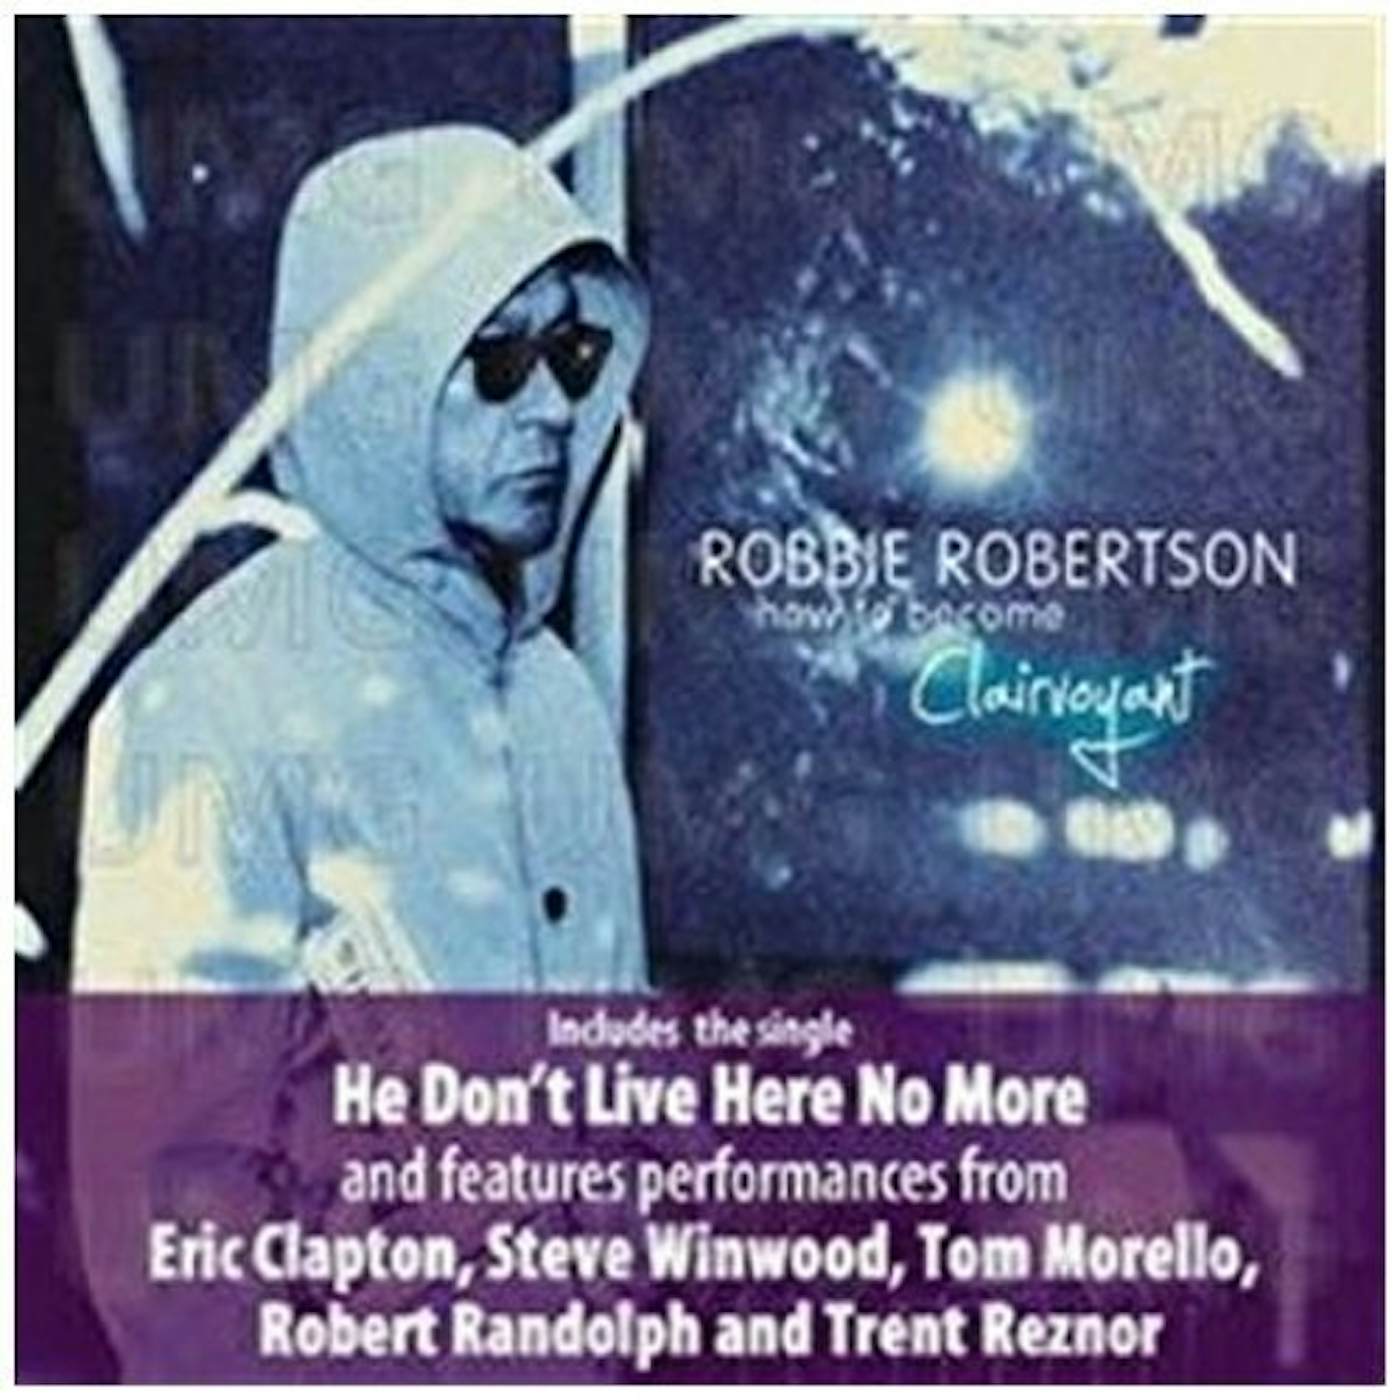 Robbie Robertson HOW TO BE CLAIRVOYANT Vinyl Record